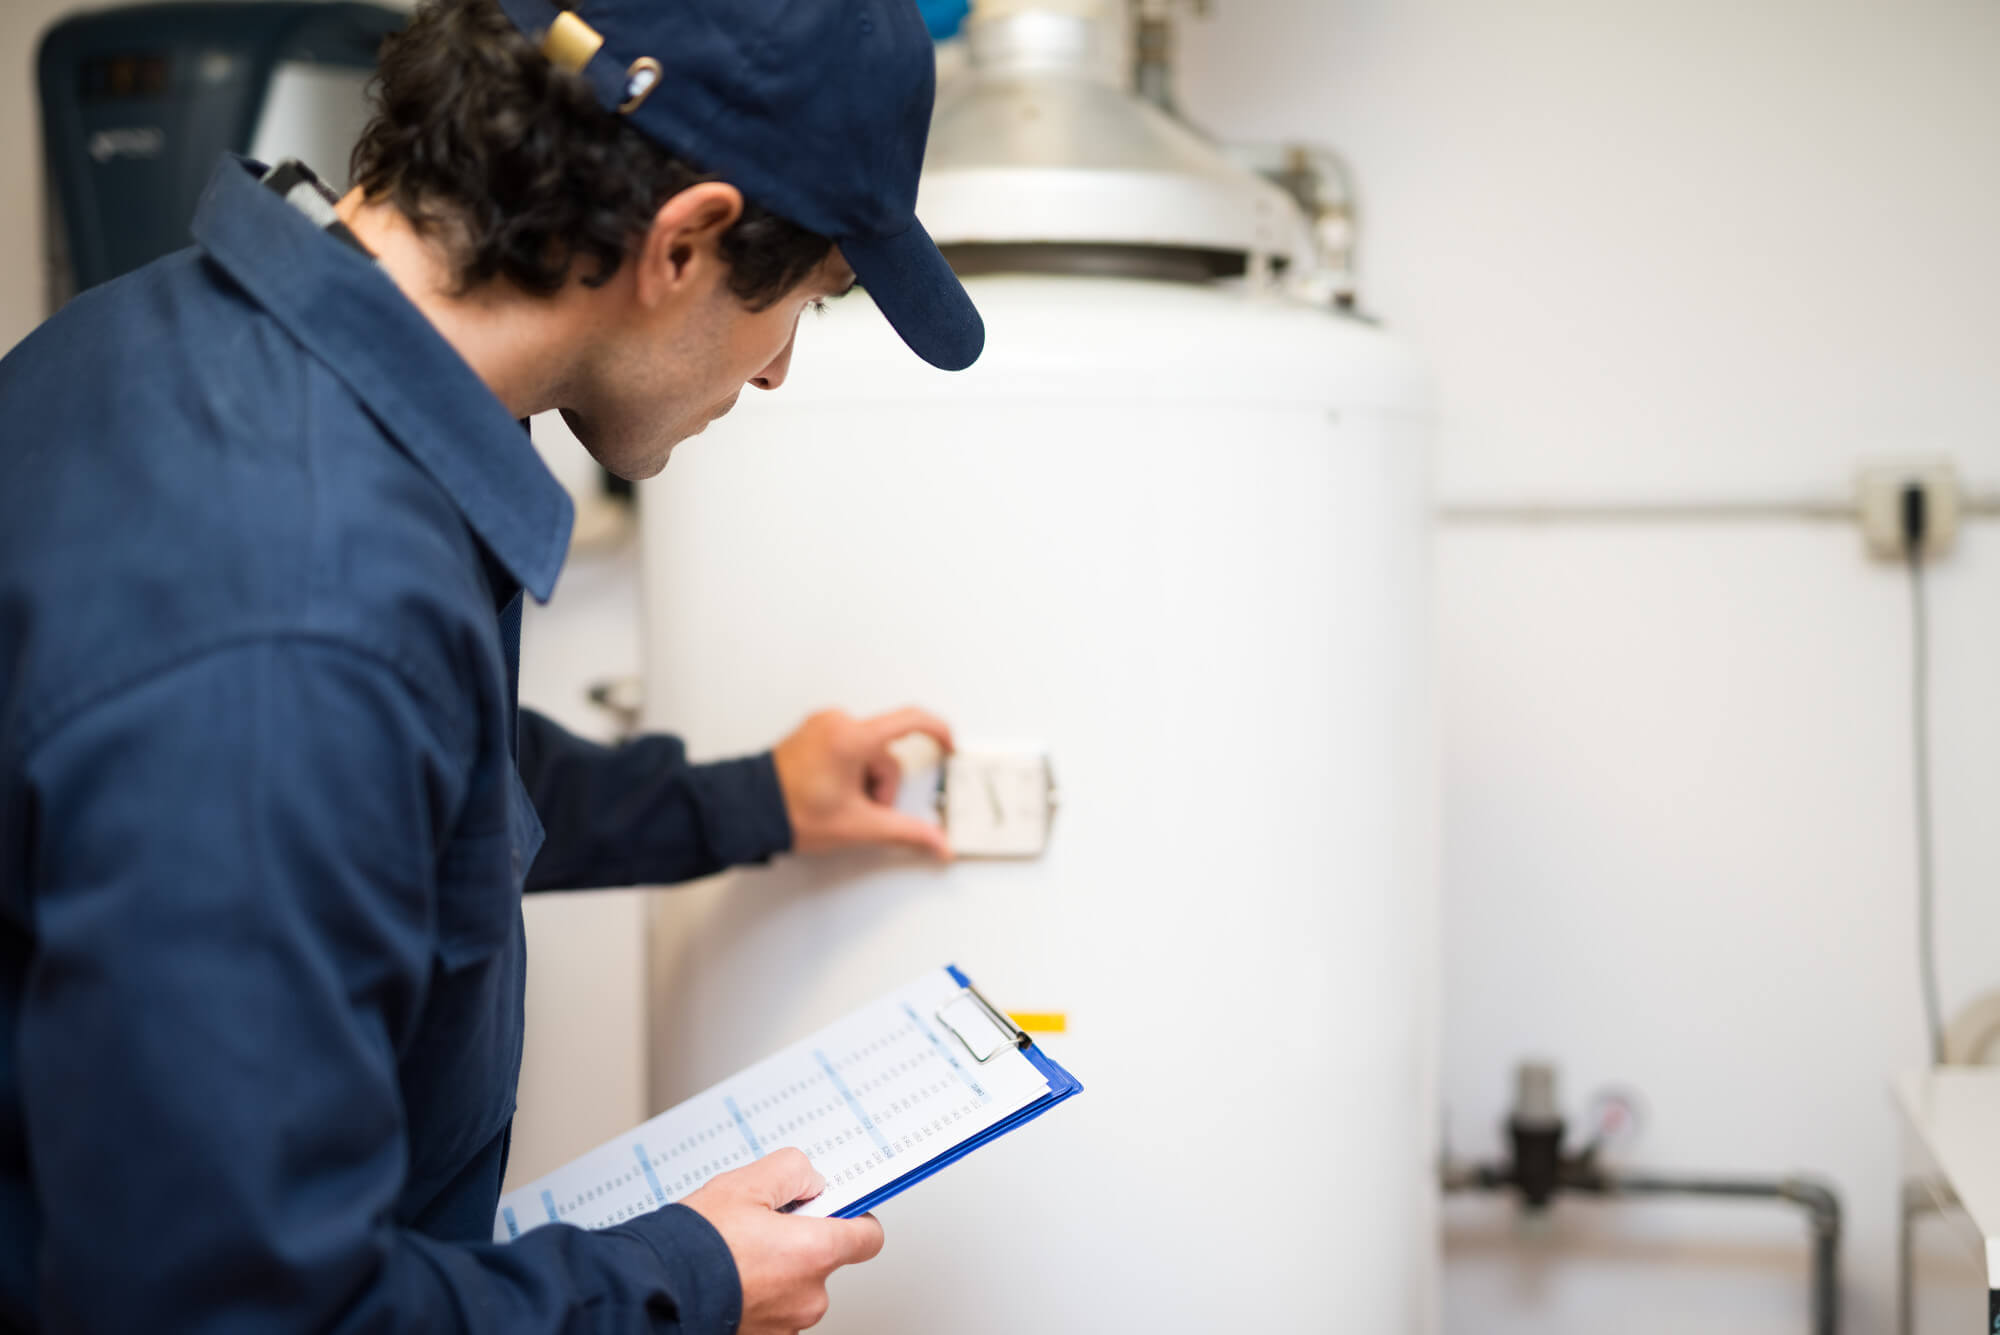 GAS VS ELECTRIC WATER HEATERS: WHAT’S THE DIFFERENCE?